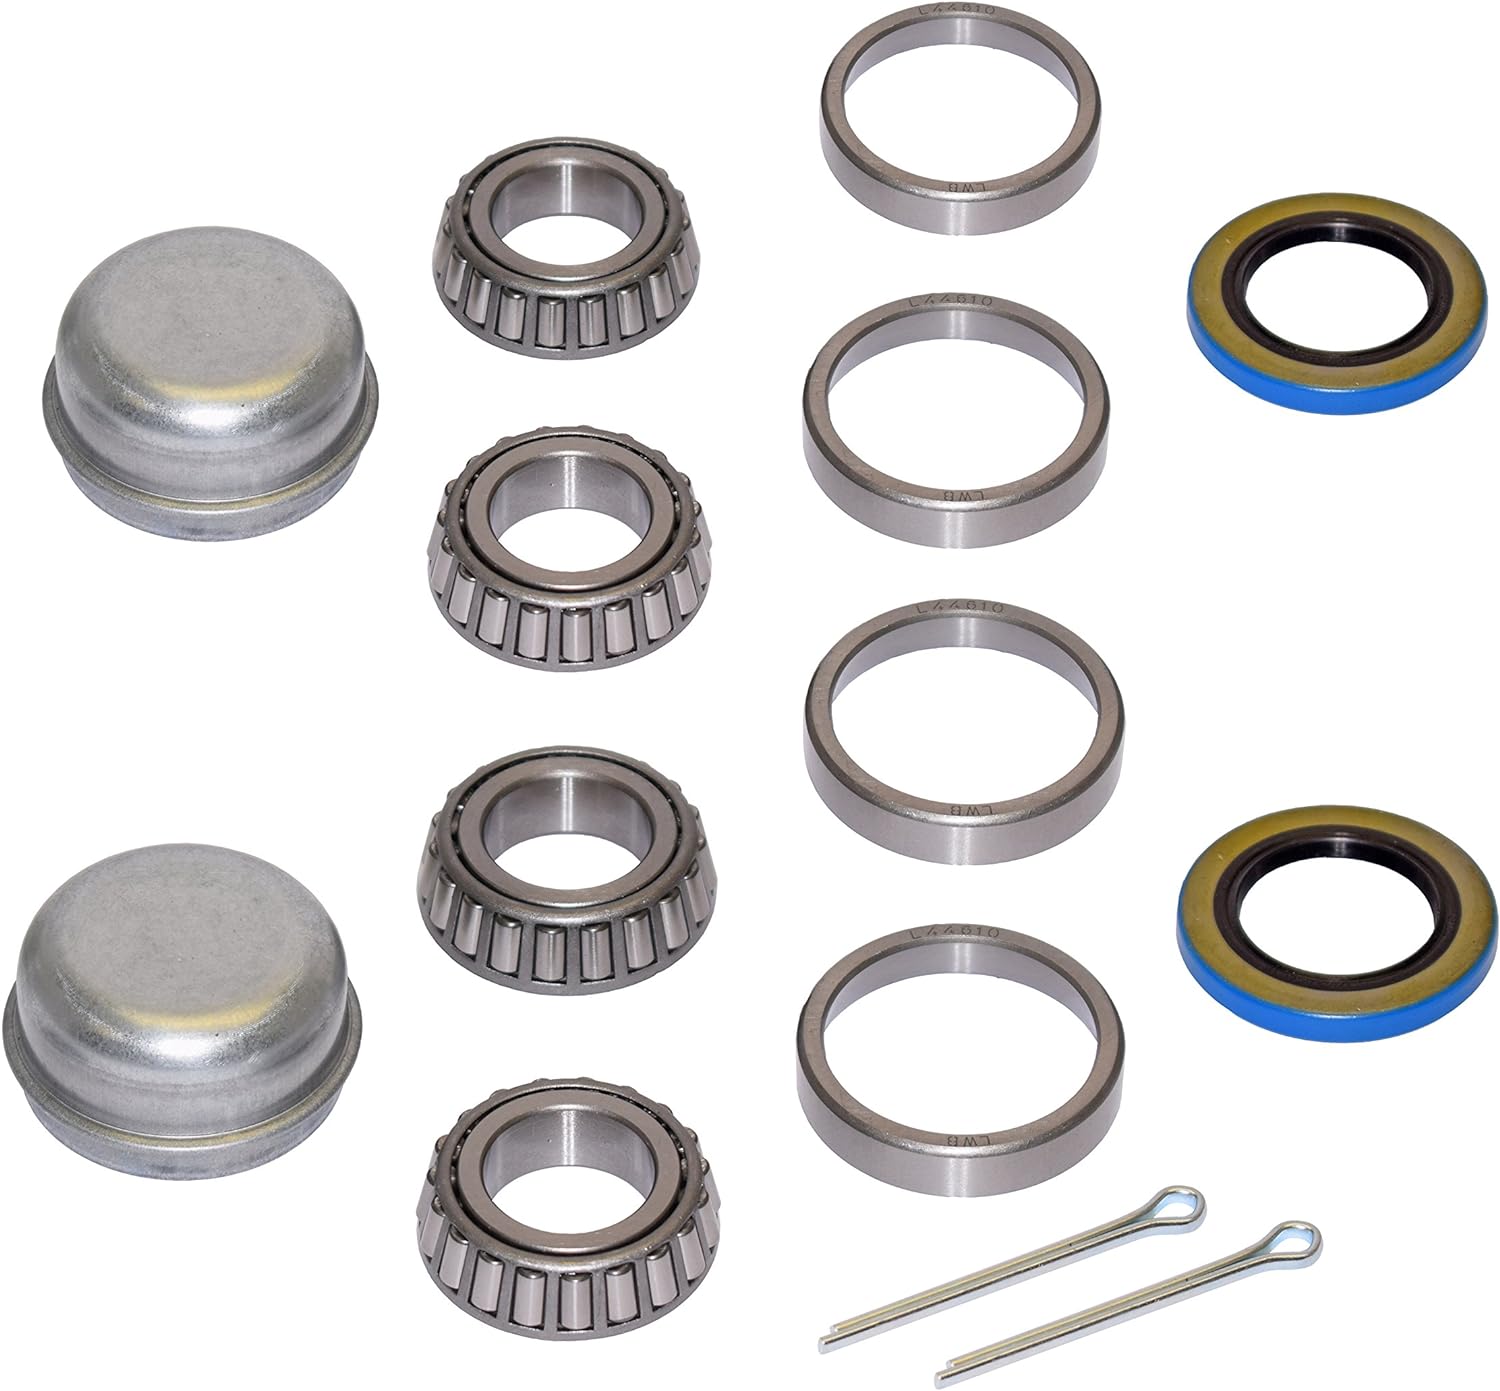 RIGID HITCH INCORPORATED Pair of Trailer Bearing Repair Kits for 1 Inch Straight Spindles